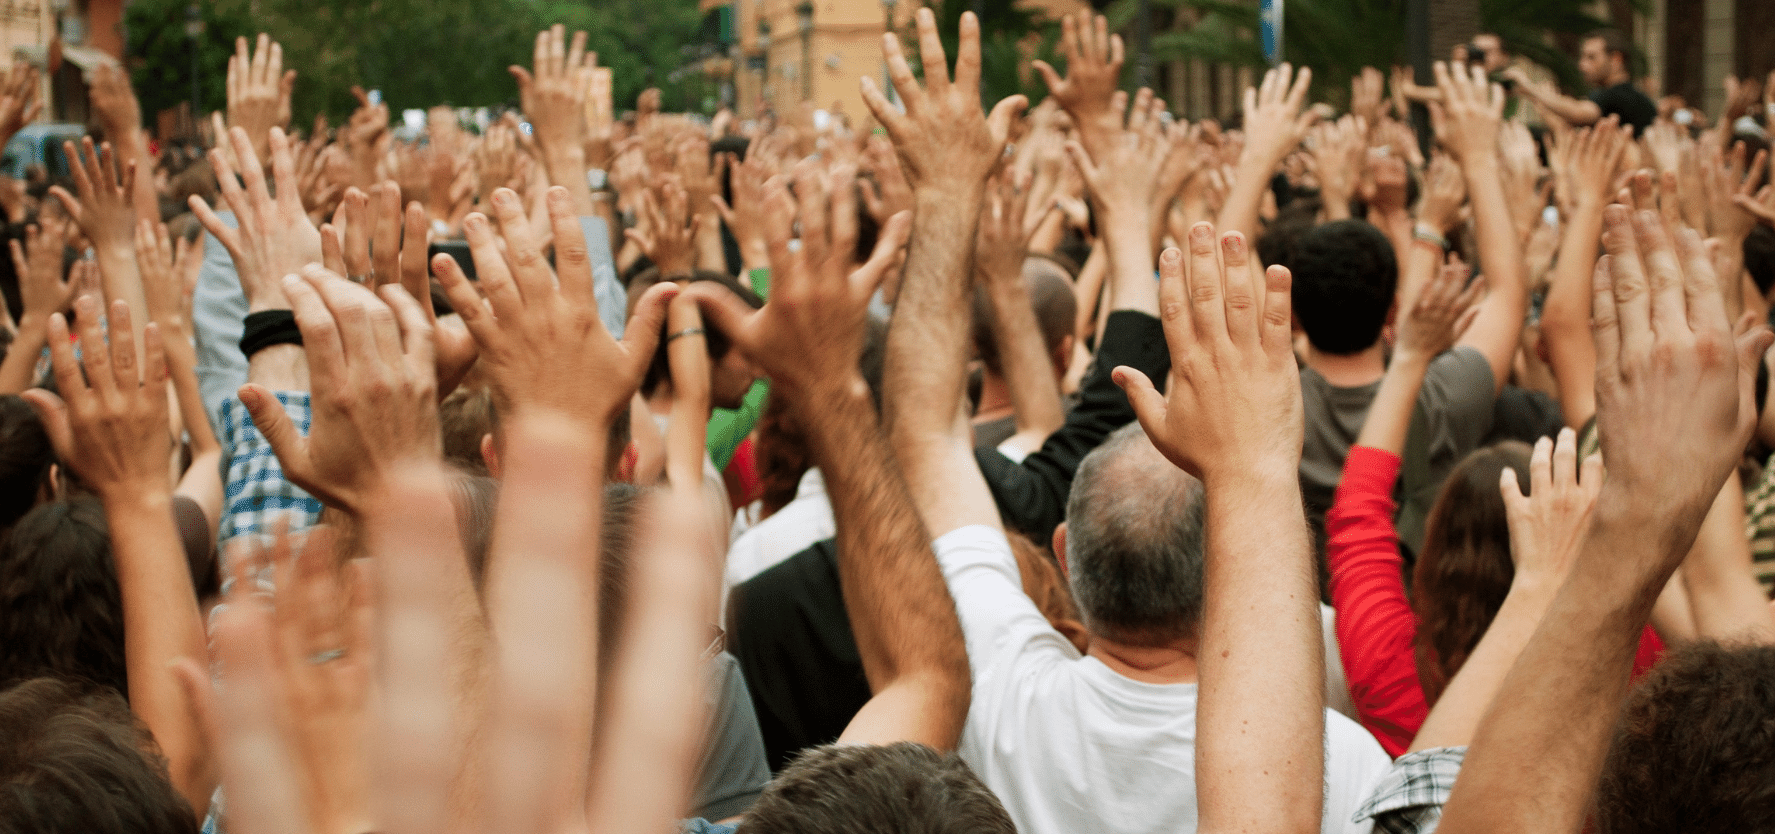 A crowd of people are pictured with their hands raised in the air in pacific demonstration. Picture: Lalocracio, iStock